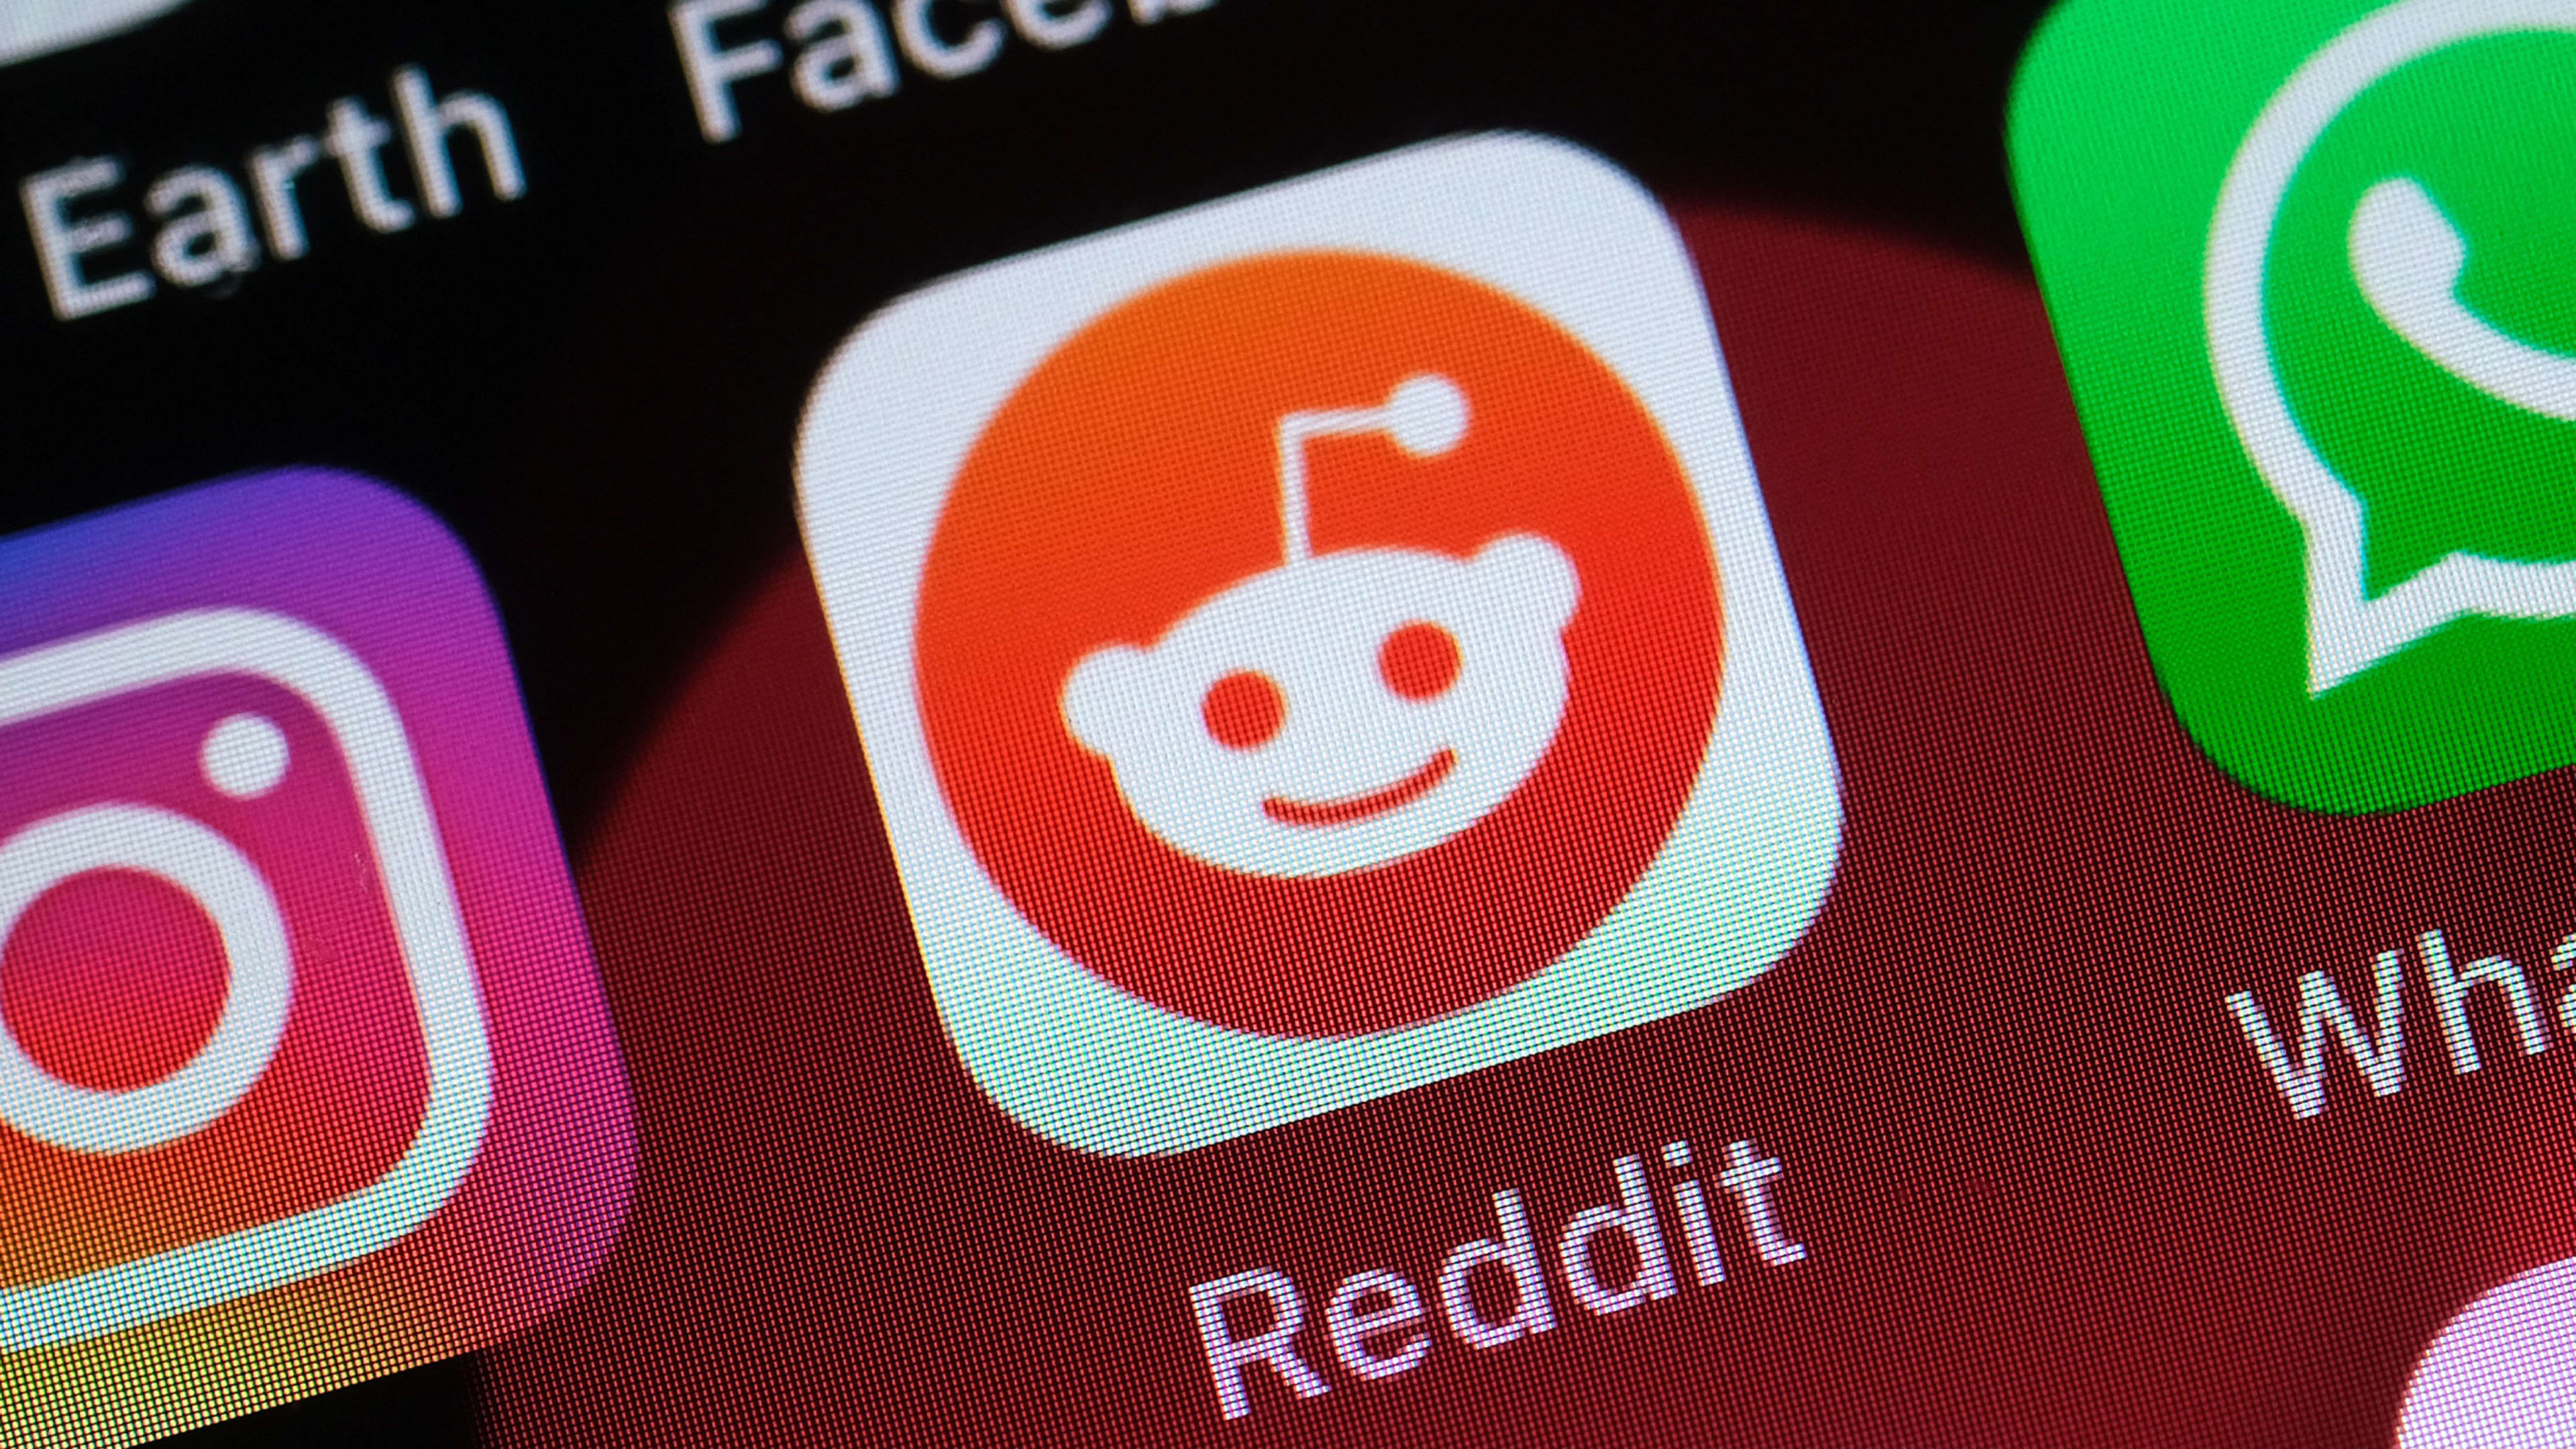 Reddit follows in Twitter’s footsteps and restricts third-party apps